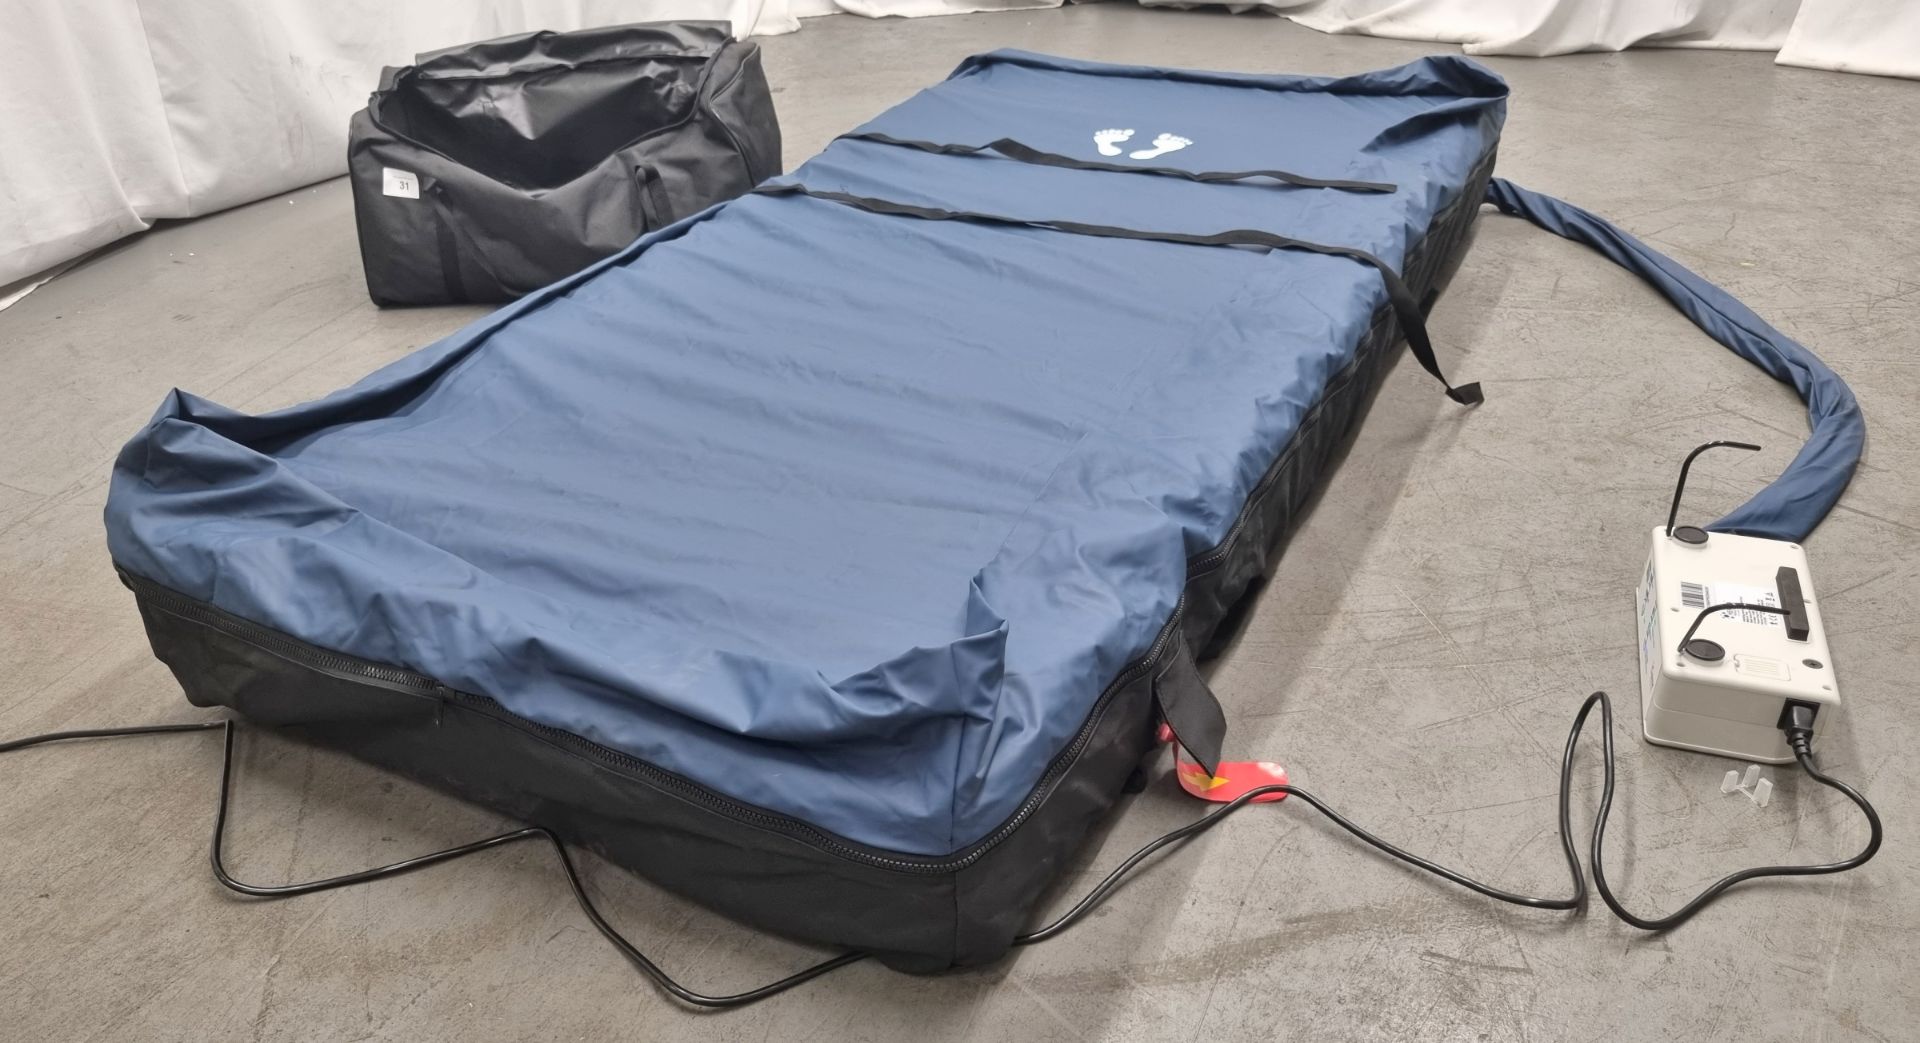 Herida Argyll II dynamic airflow mattress system with digital pump in carry bag - Image 6 of 9